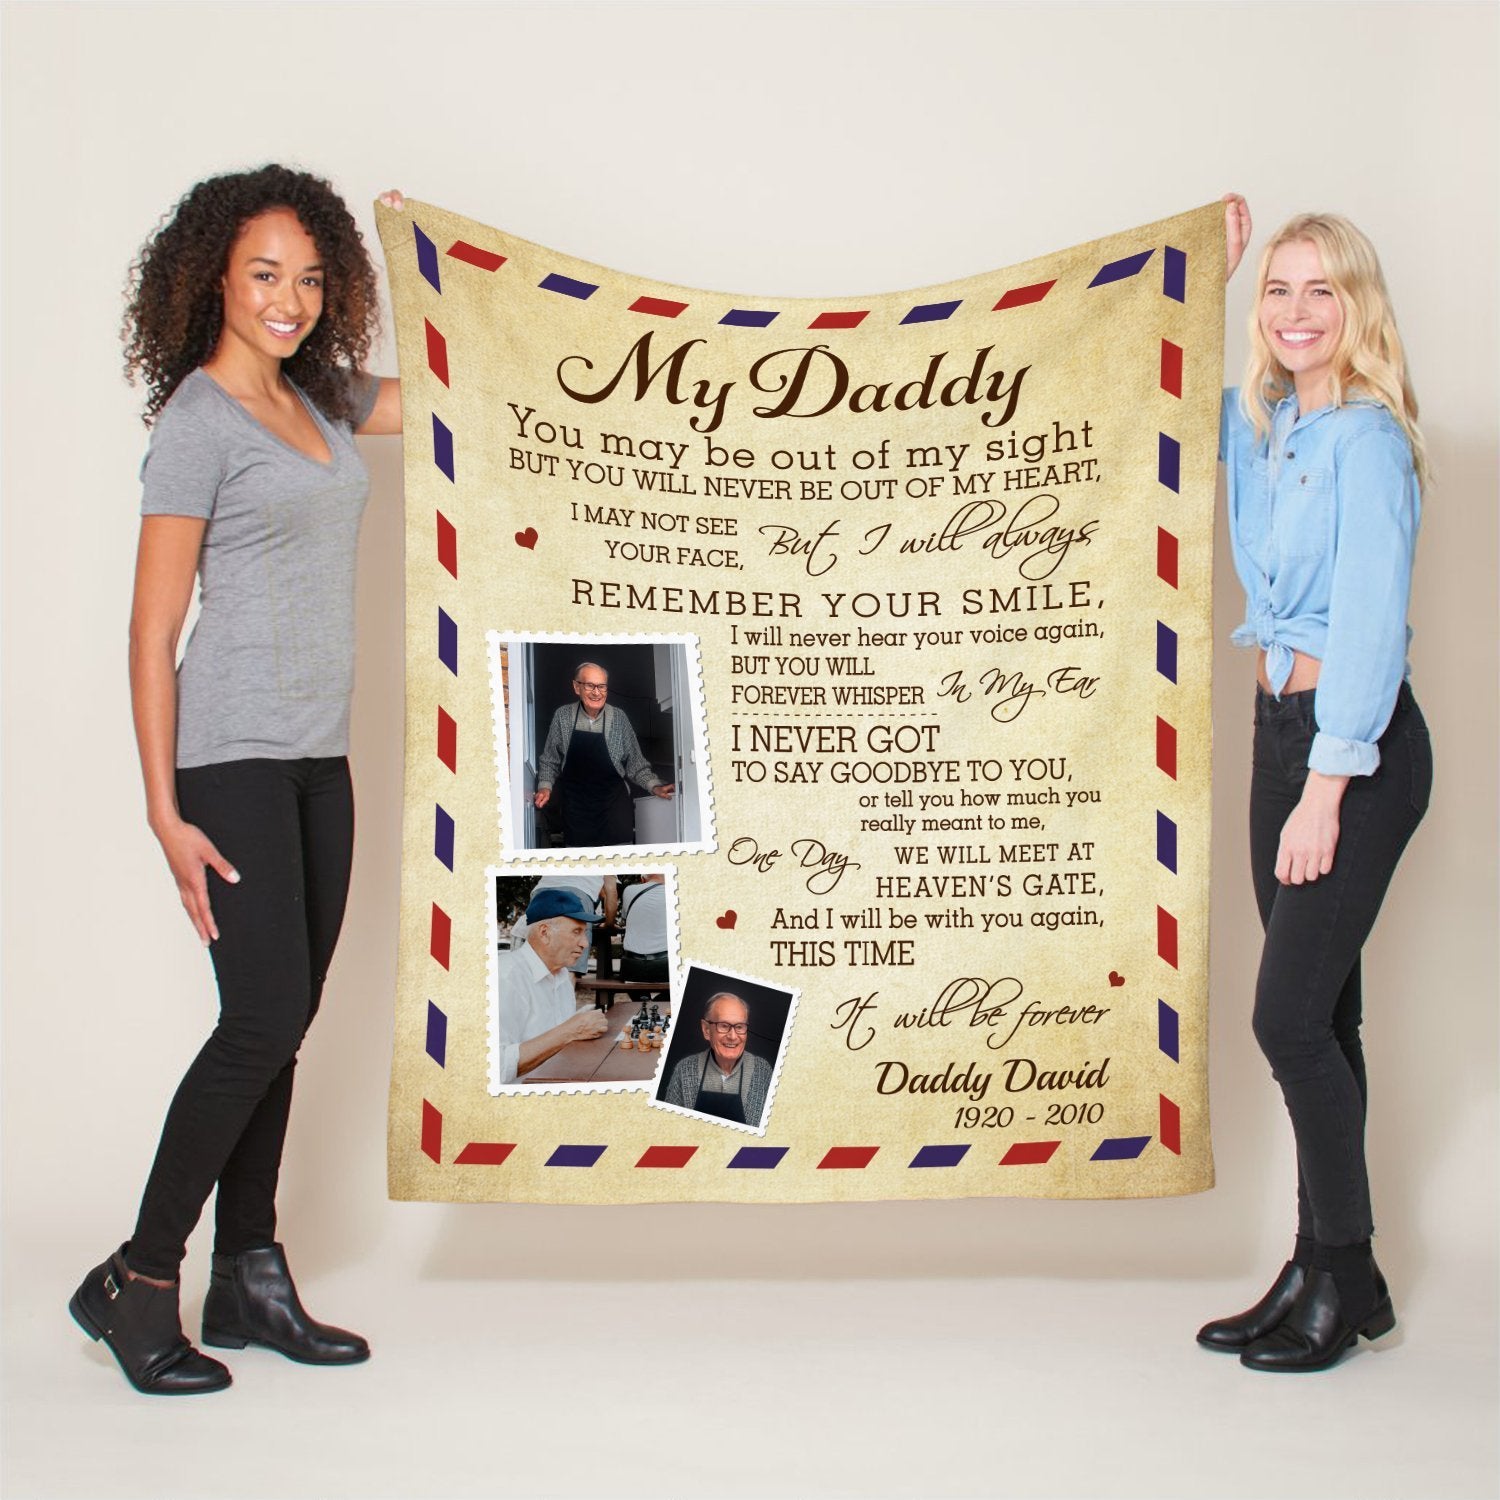 Daddy is gone and you miss his warmth like the childhood days? Maybe a Memorial Blanket can help you a little bit. Create yours to remember your beloved dad or give them as sympathy gifts!